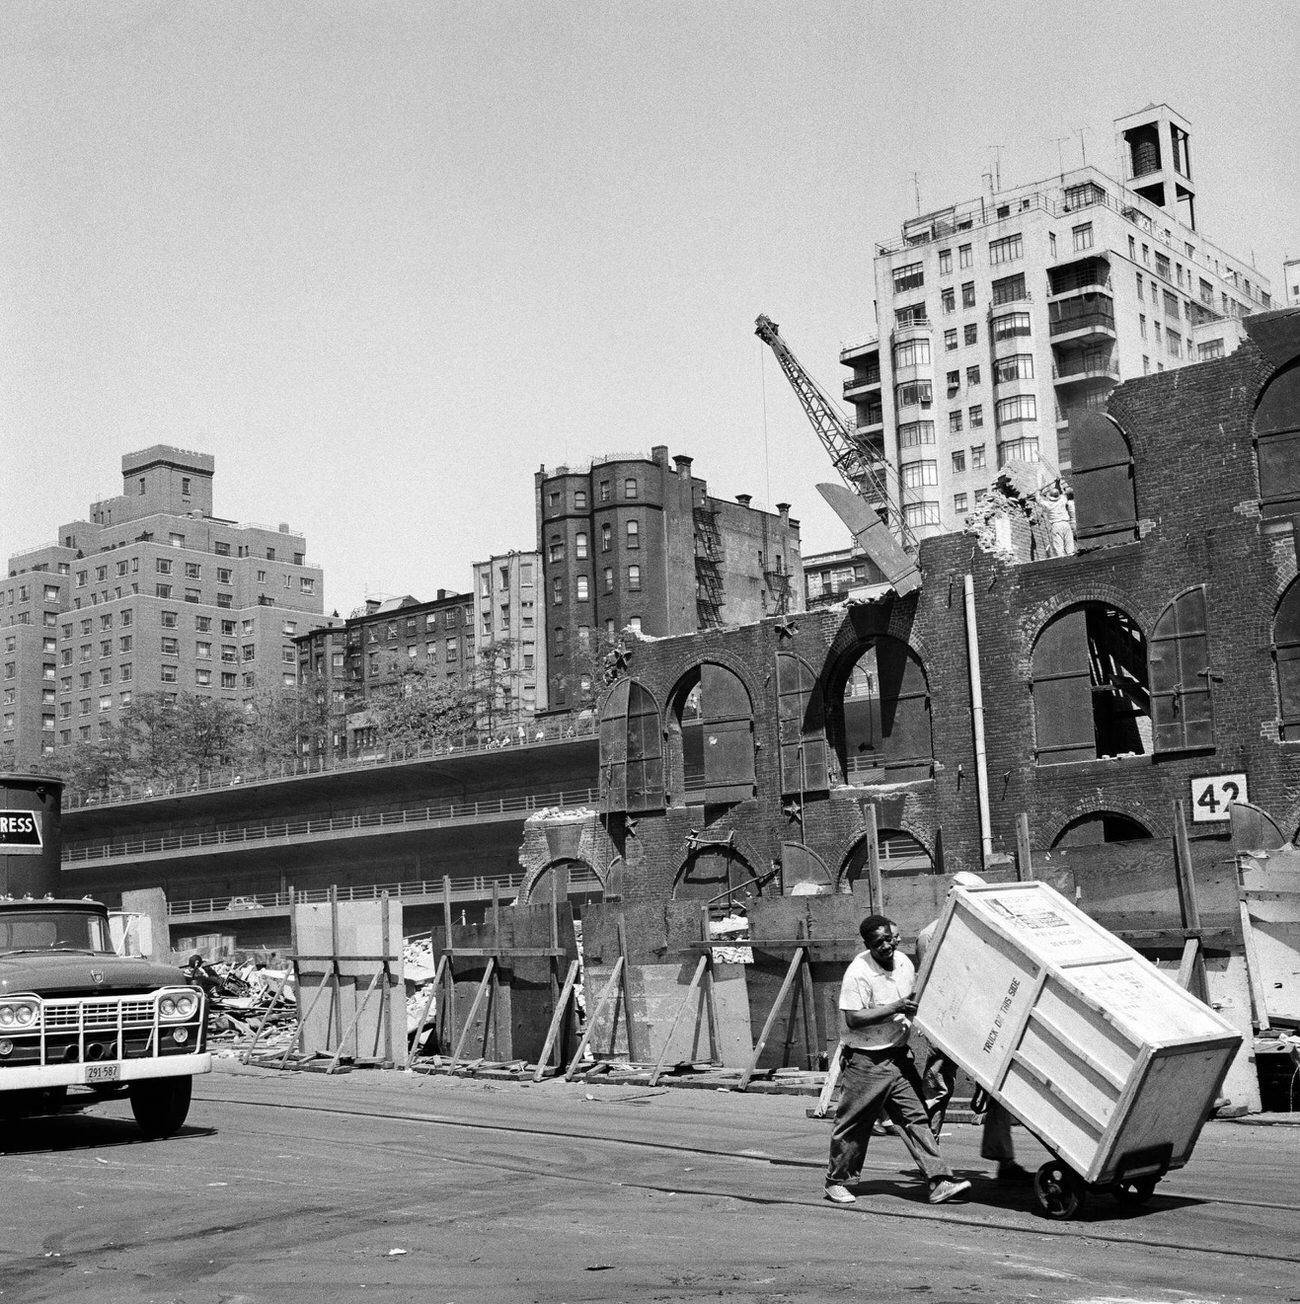 Men Make A Delivery Near A Construction Site In Brooklyn Heights, 1958.